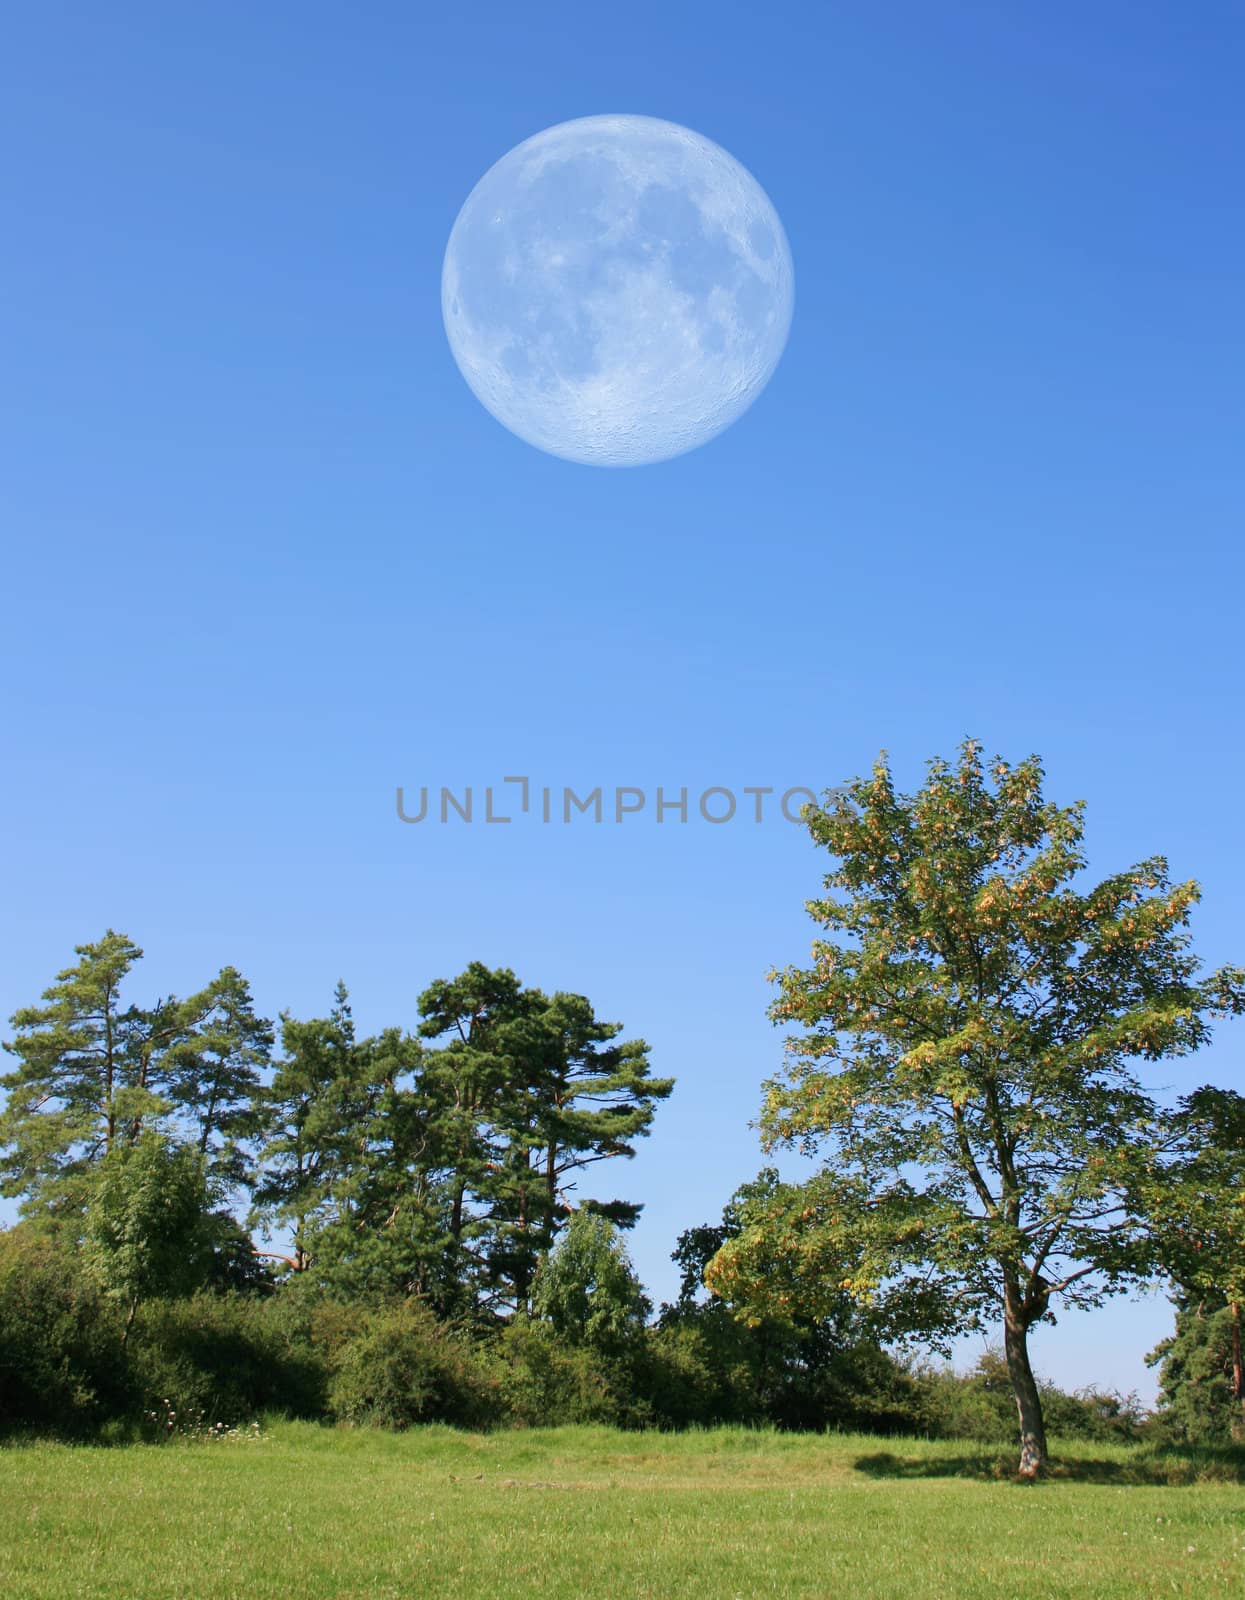 This image shows a scenery with full moon